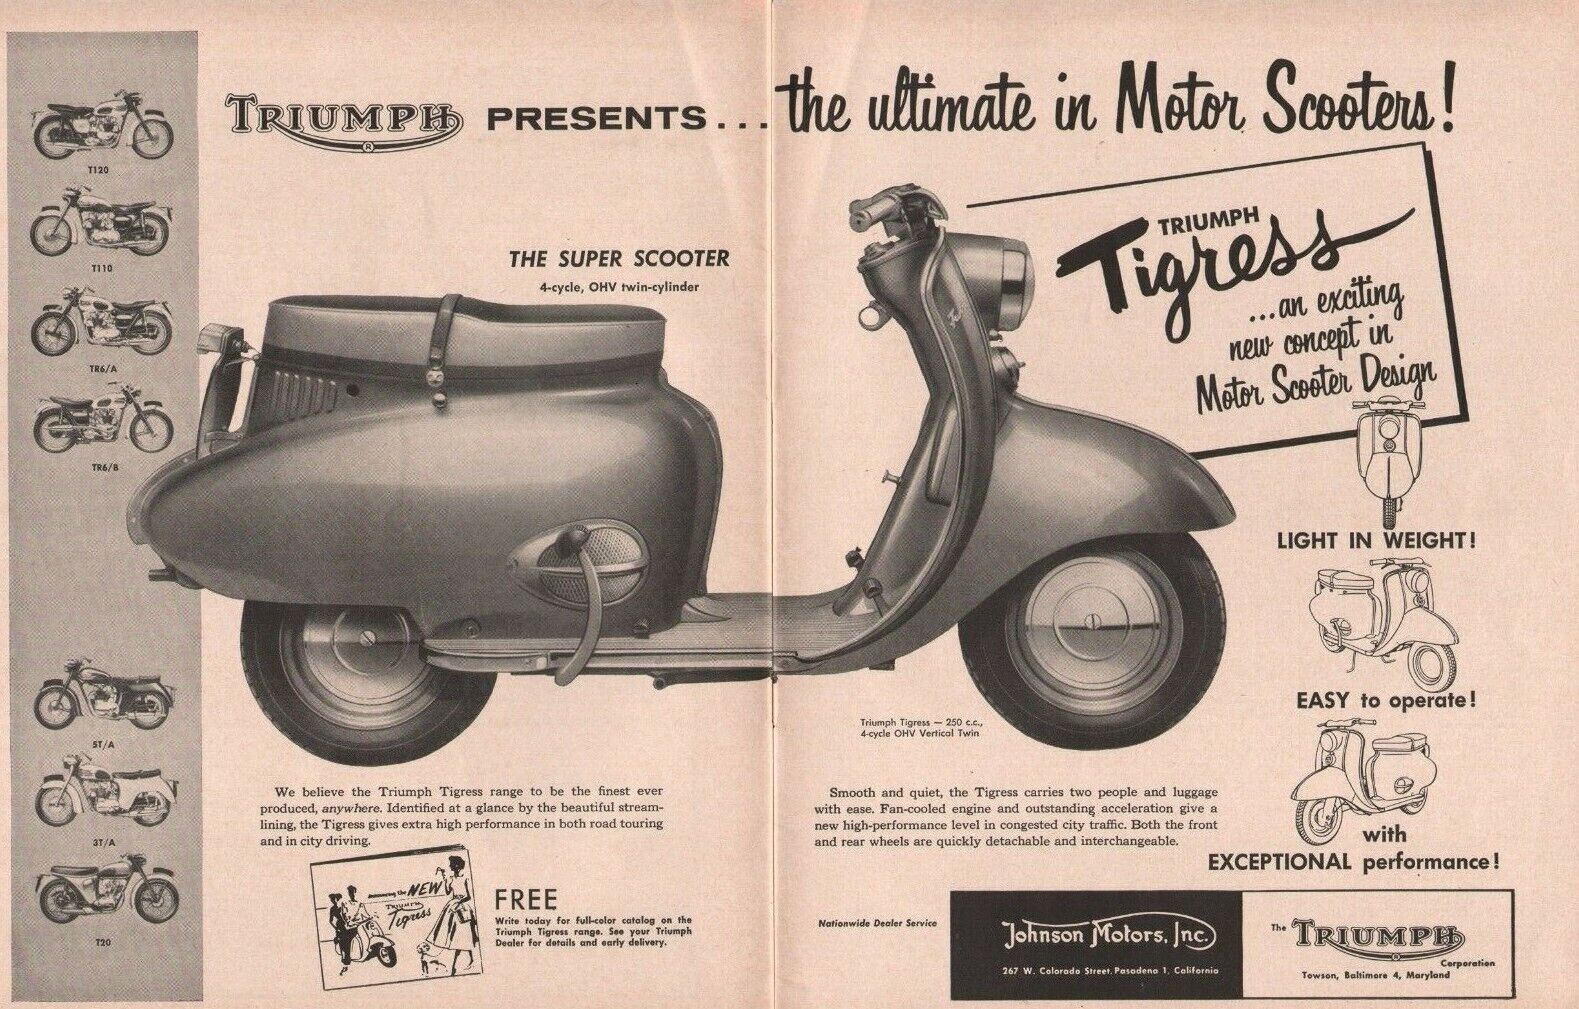 1959 Triumph Tigress Scooter - 2-Page Vintage Motorcycle Ad